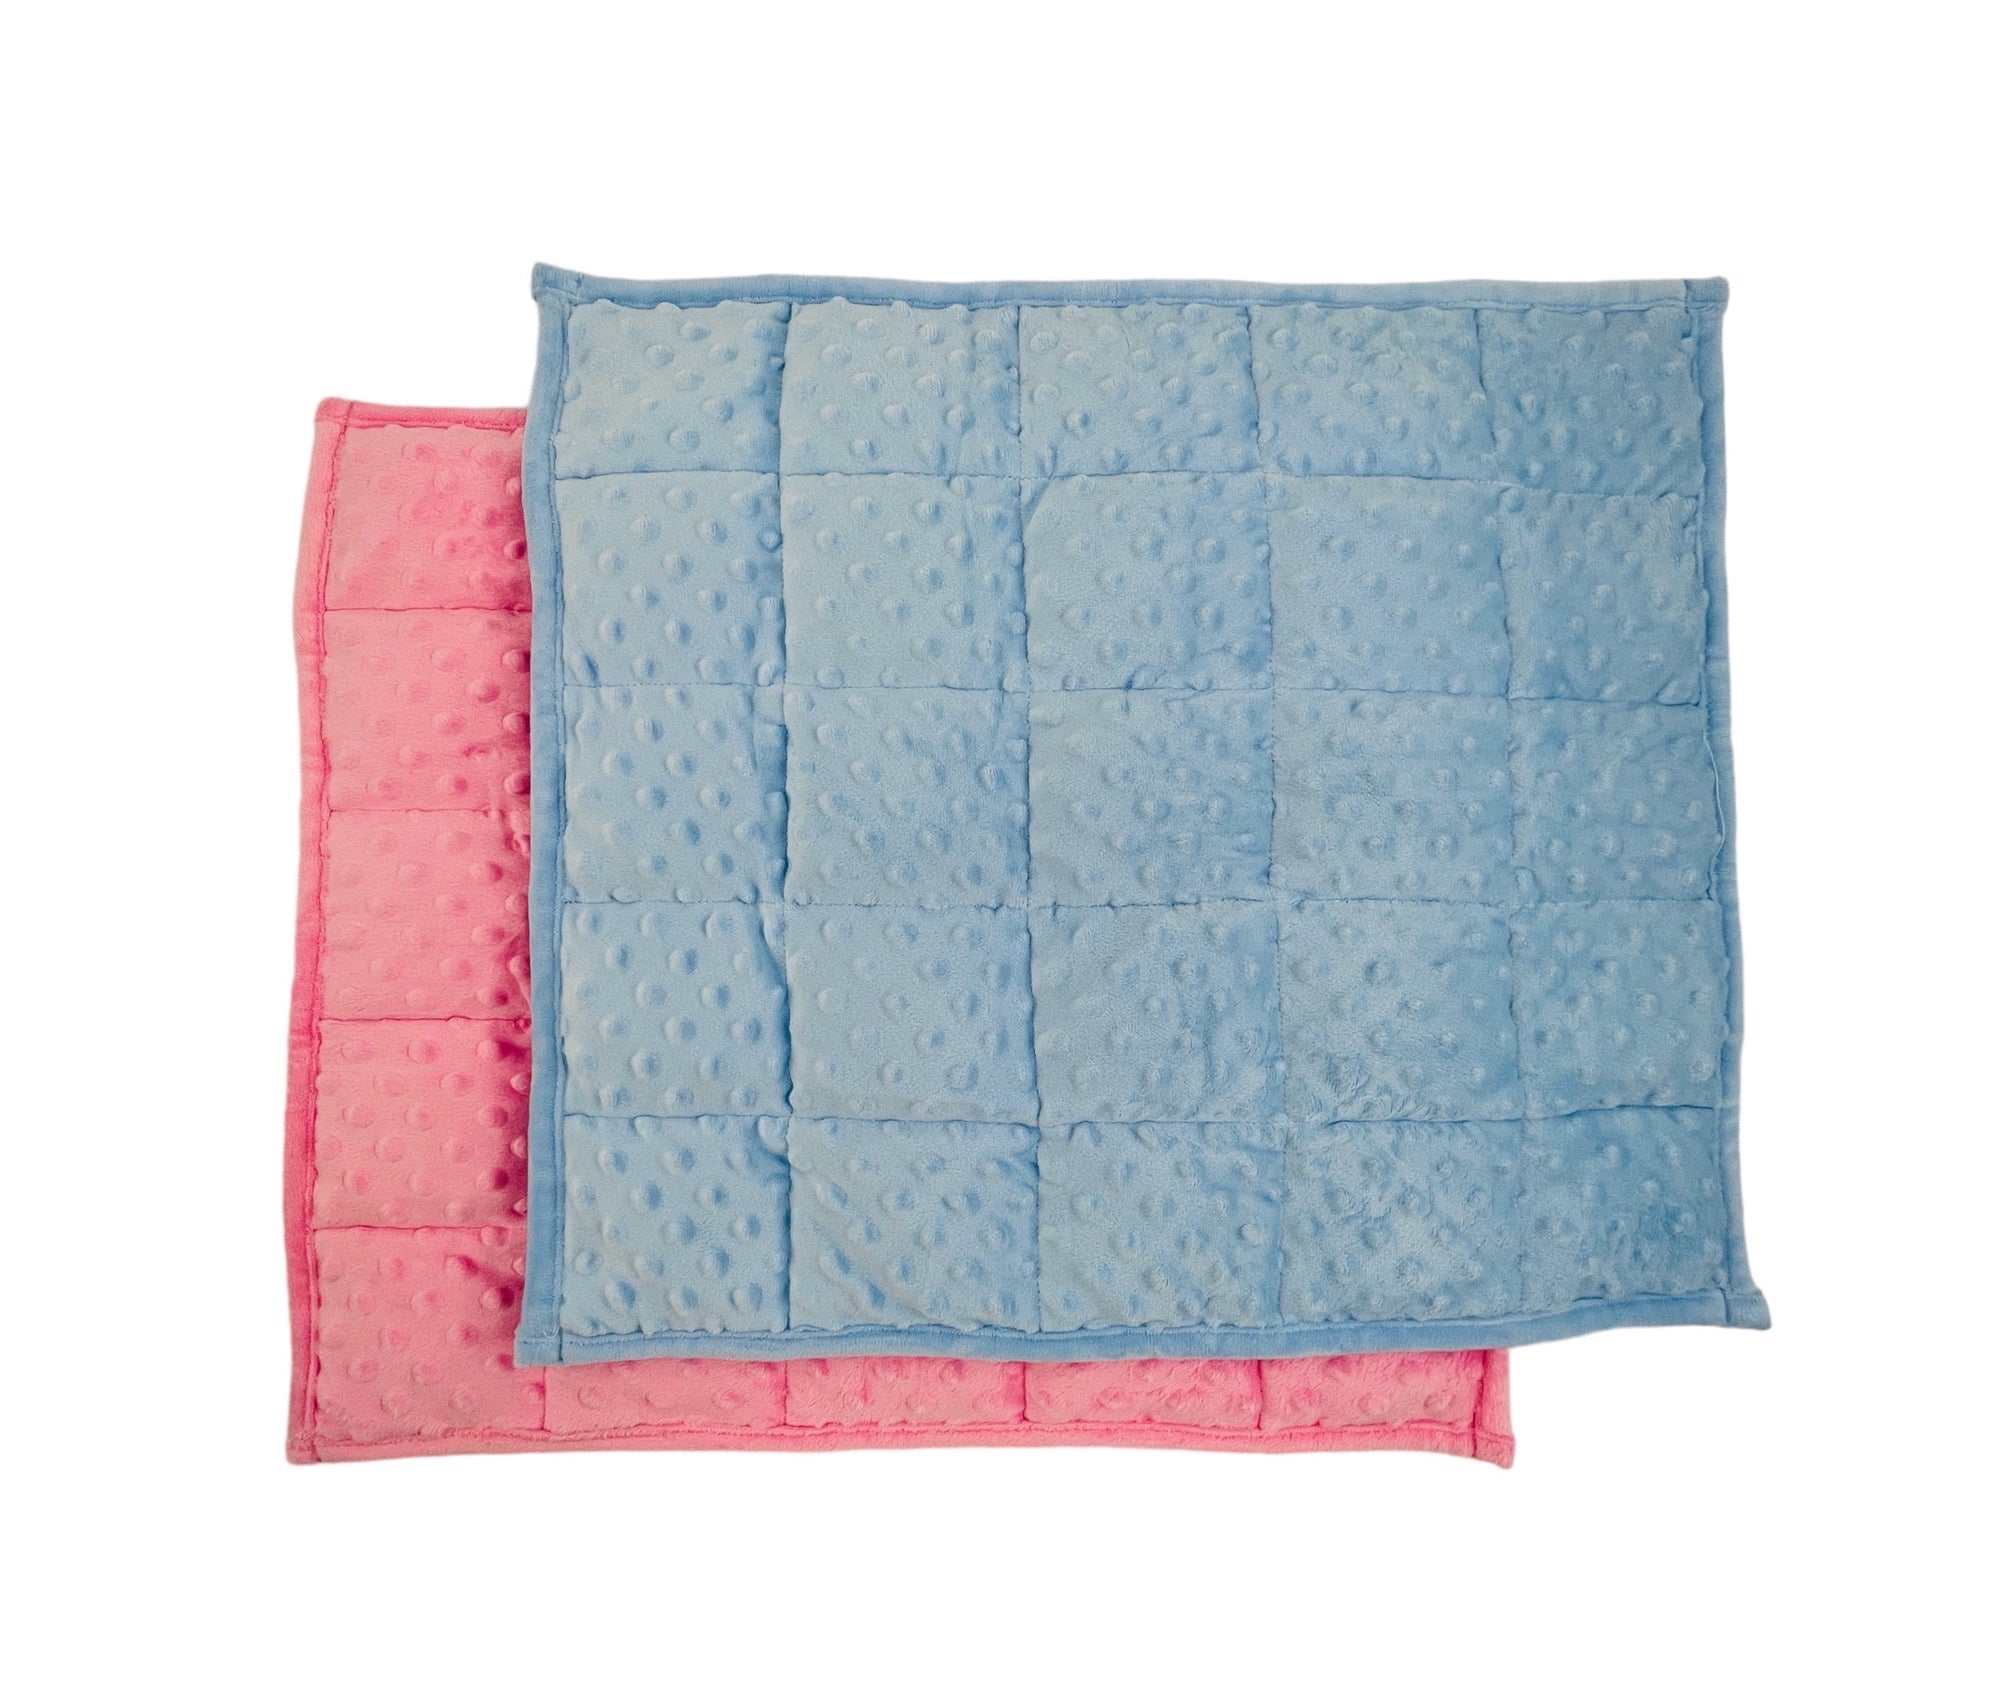 the pink and blue 2.5kg Weighted Lap Pads on a white background